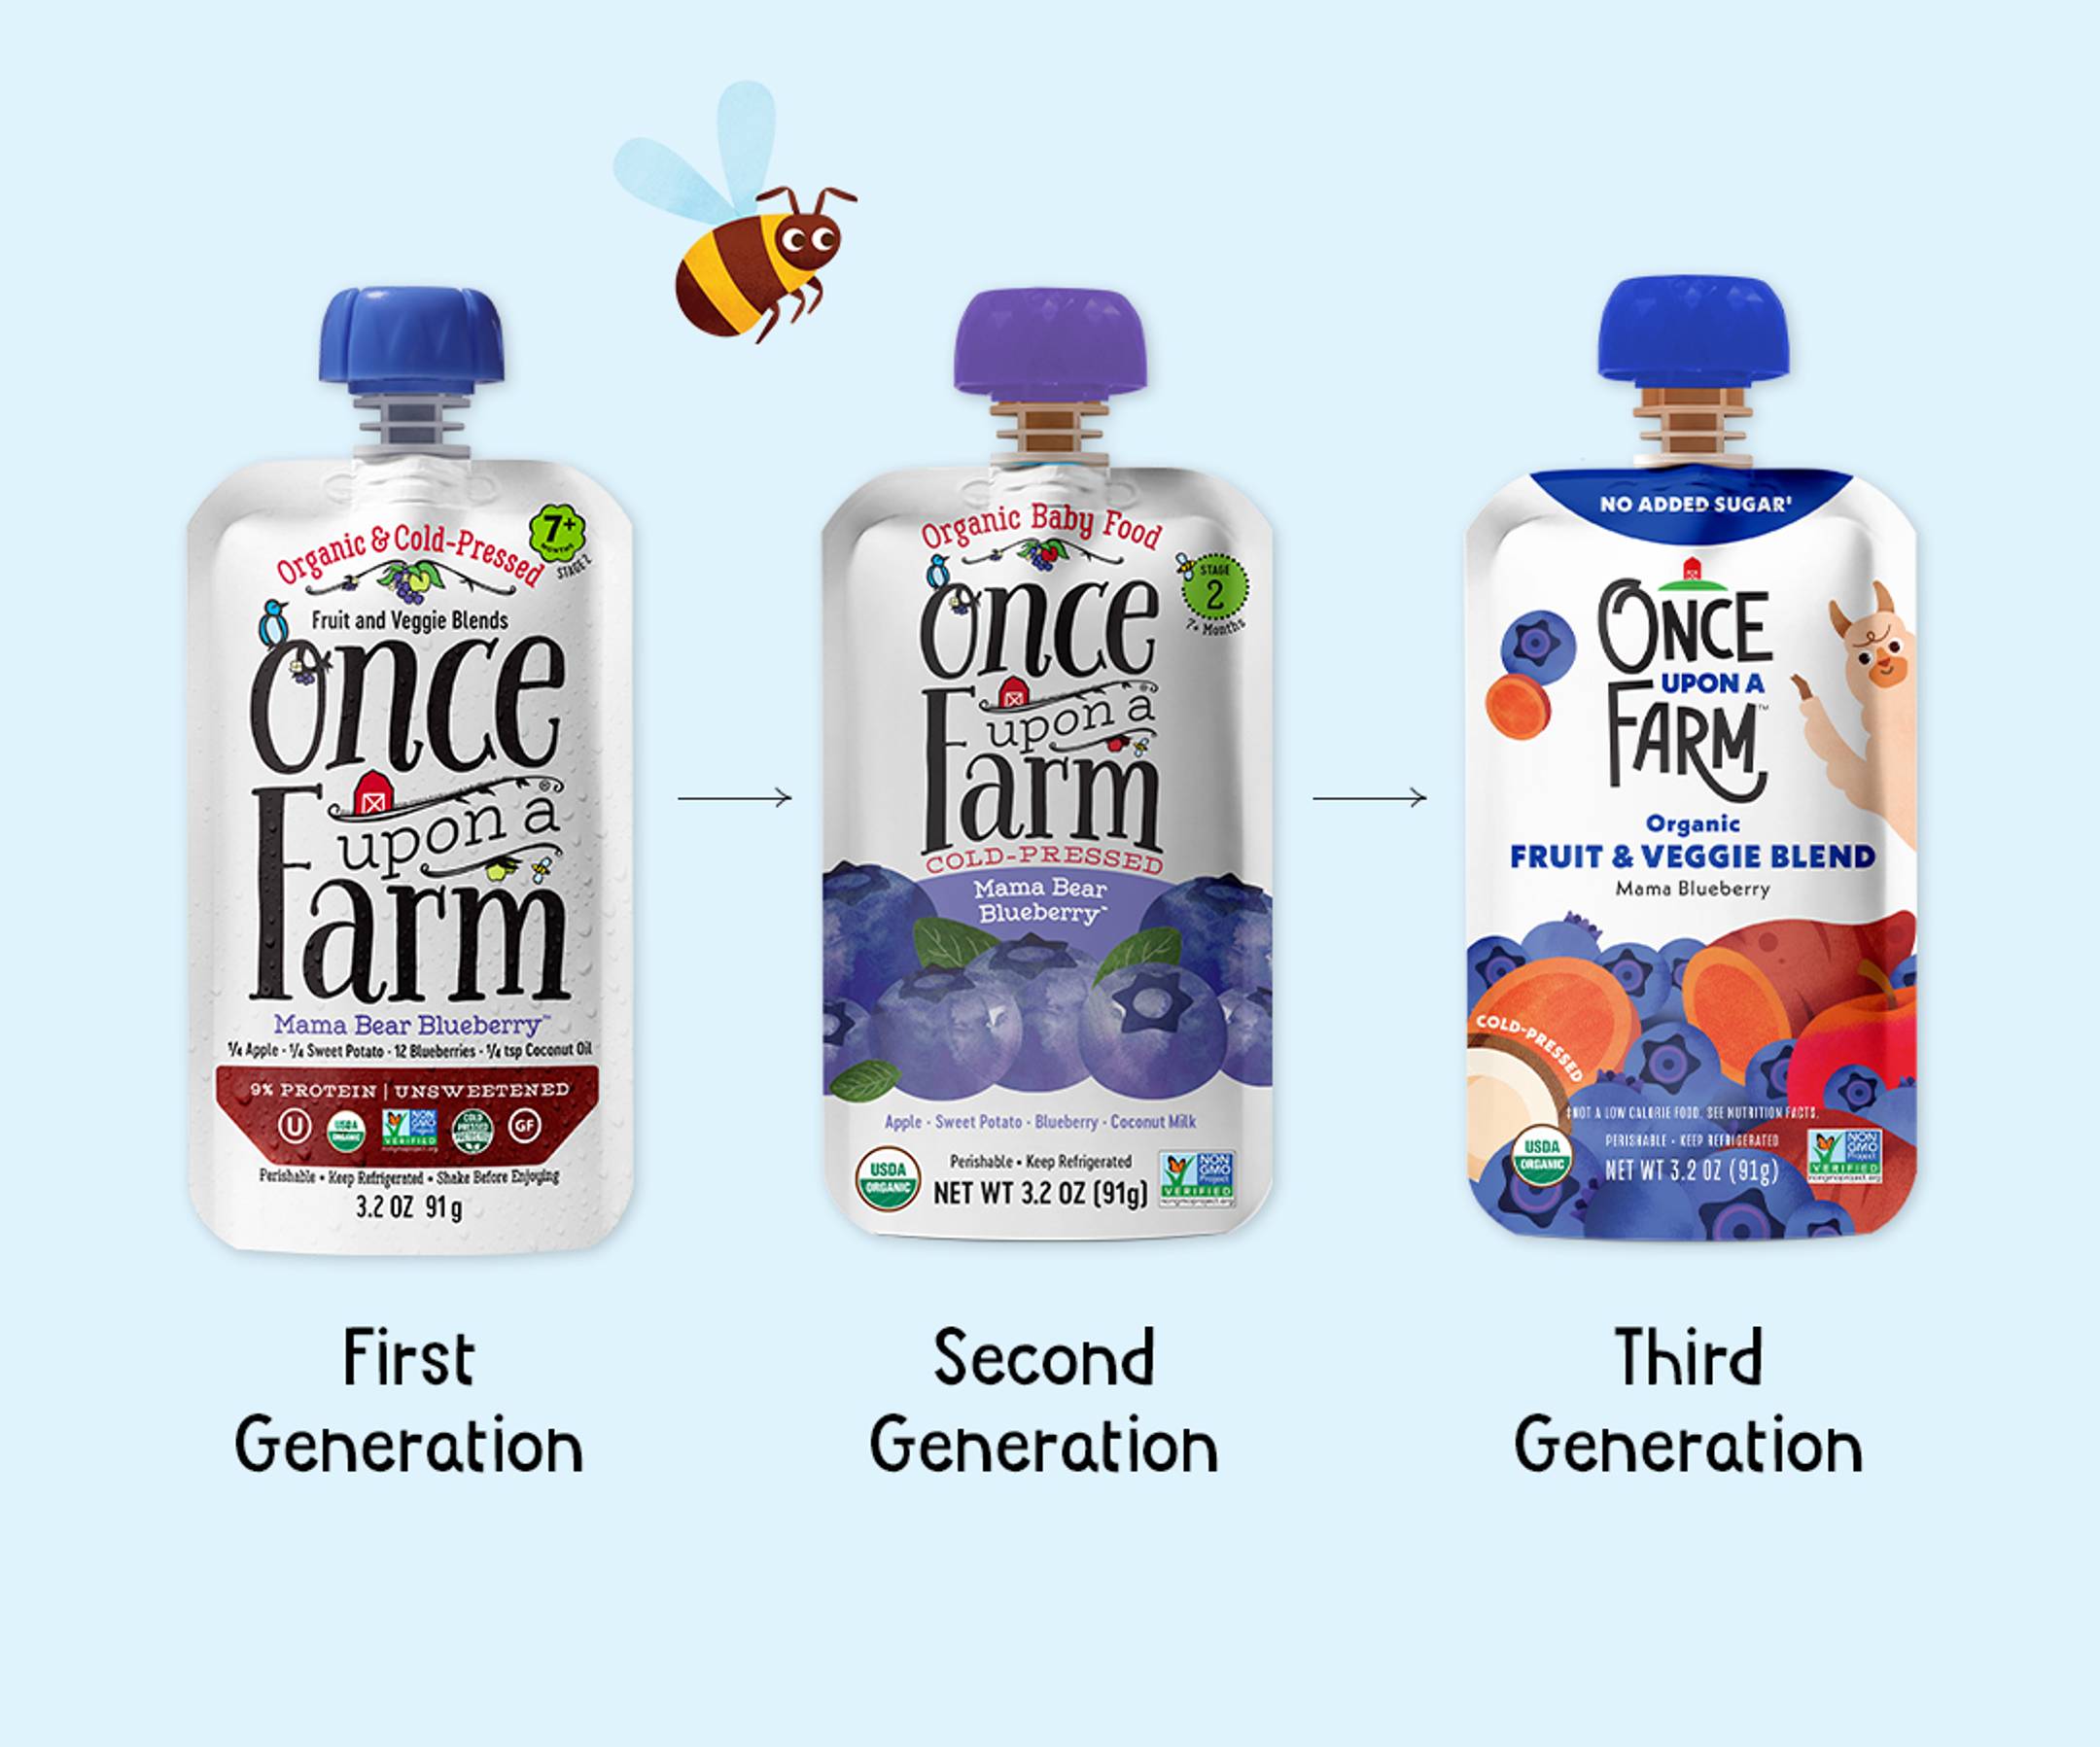 Image of three generations of Once Upon a Farm packaging.